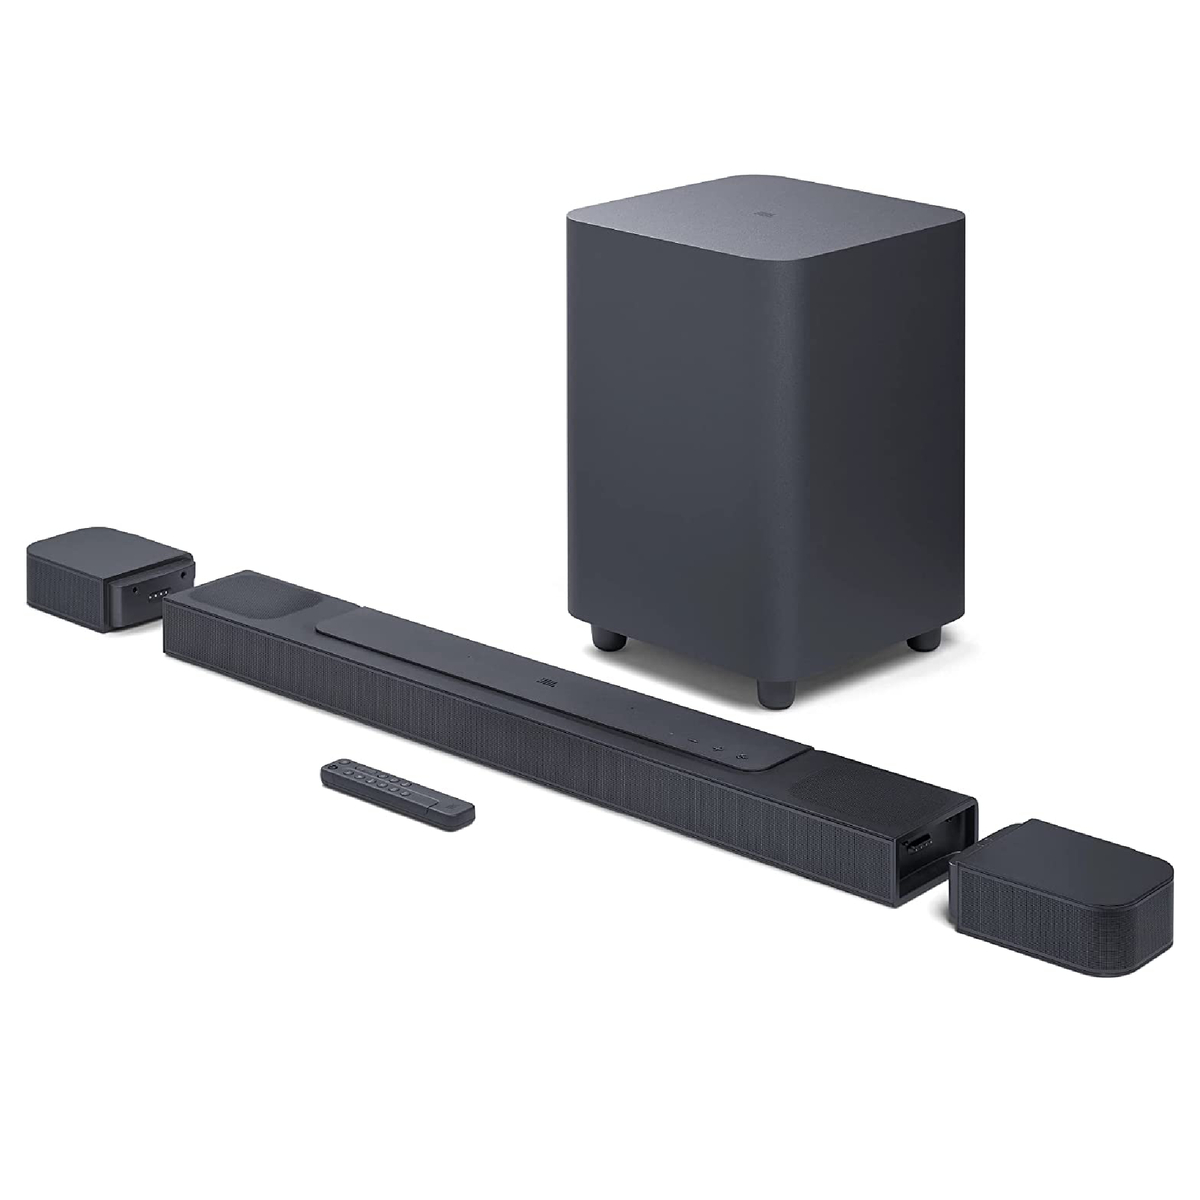 JBL 720 W 5.1.2-Channel Soundbar With Detachable Surround Speakers with Dolby Atmos, Black, BAR800